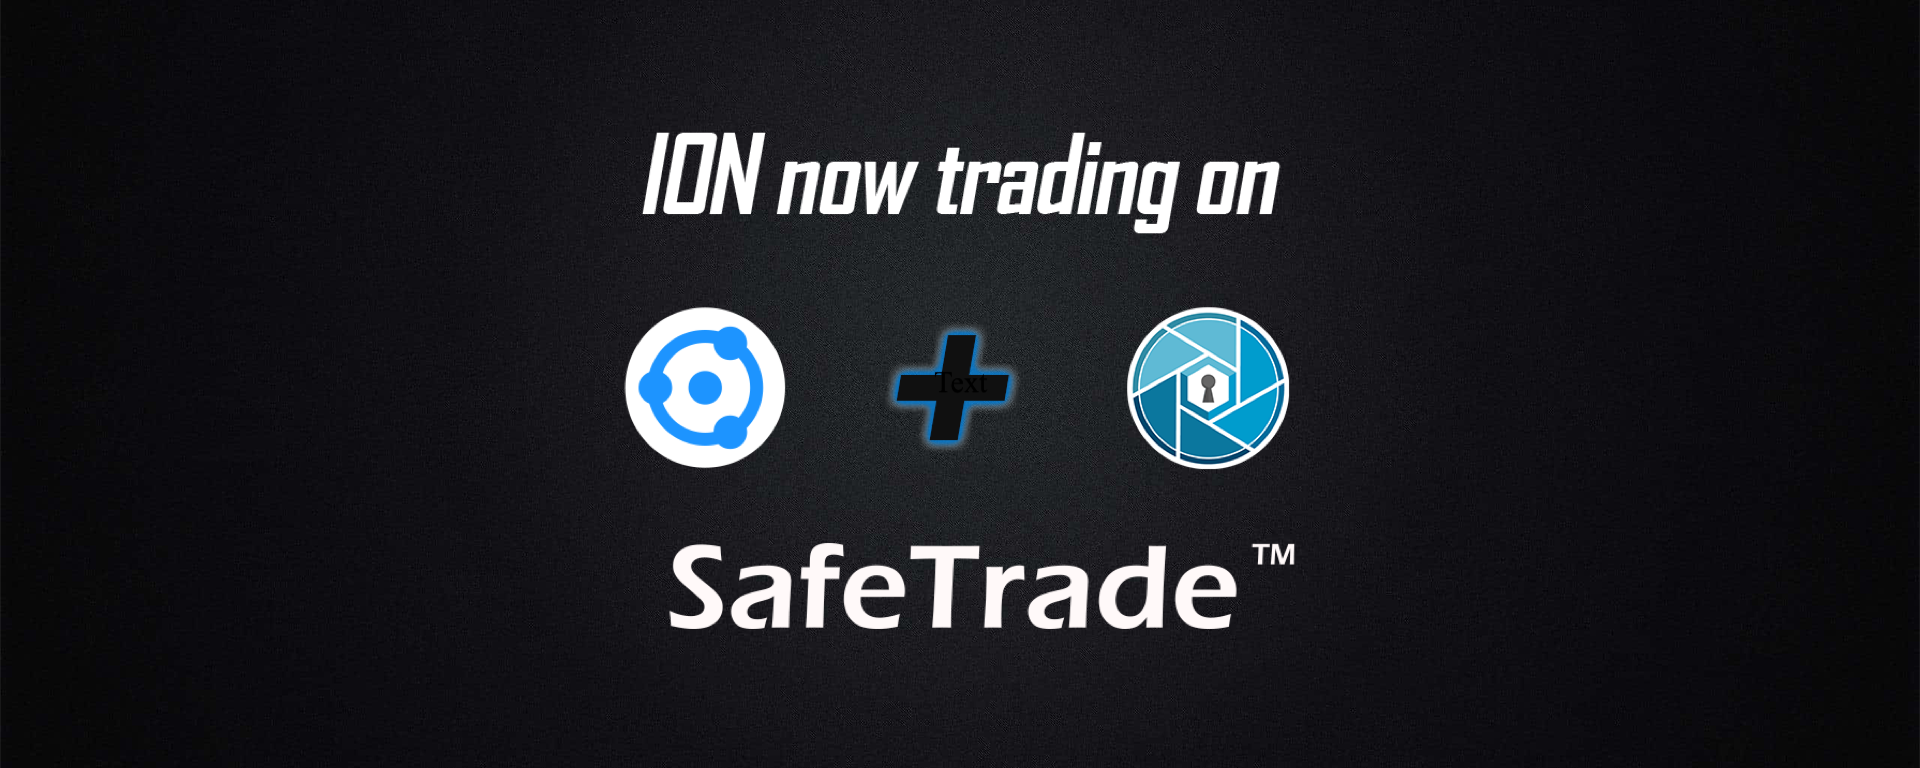 ION on SafeTrade